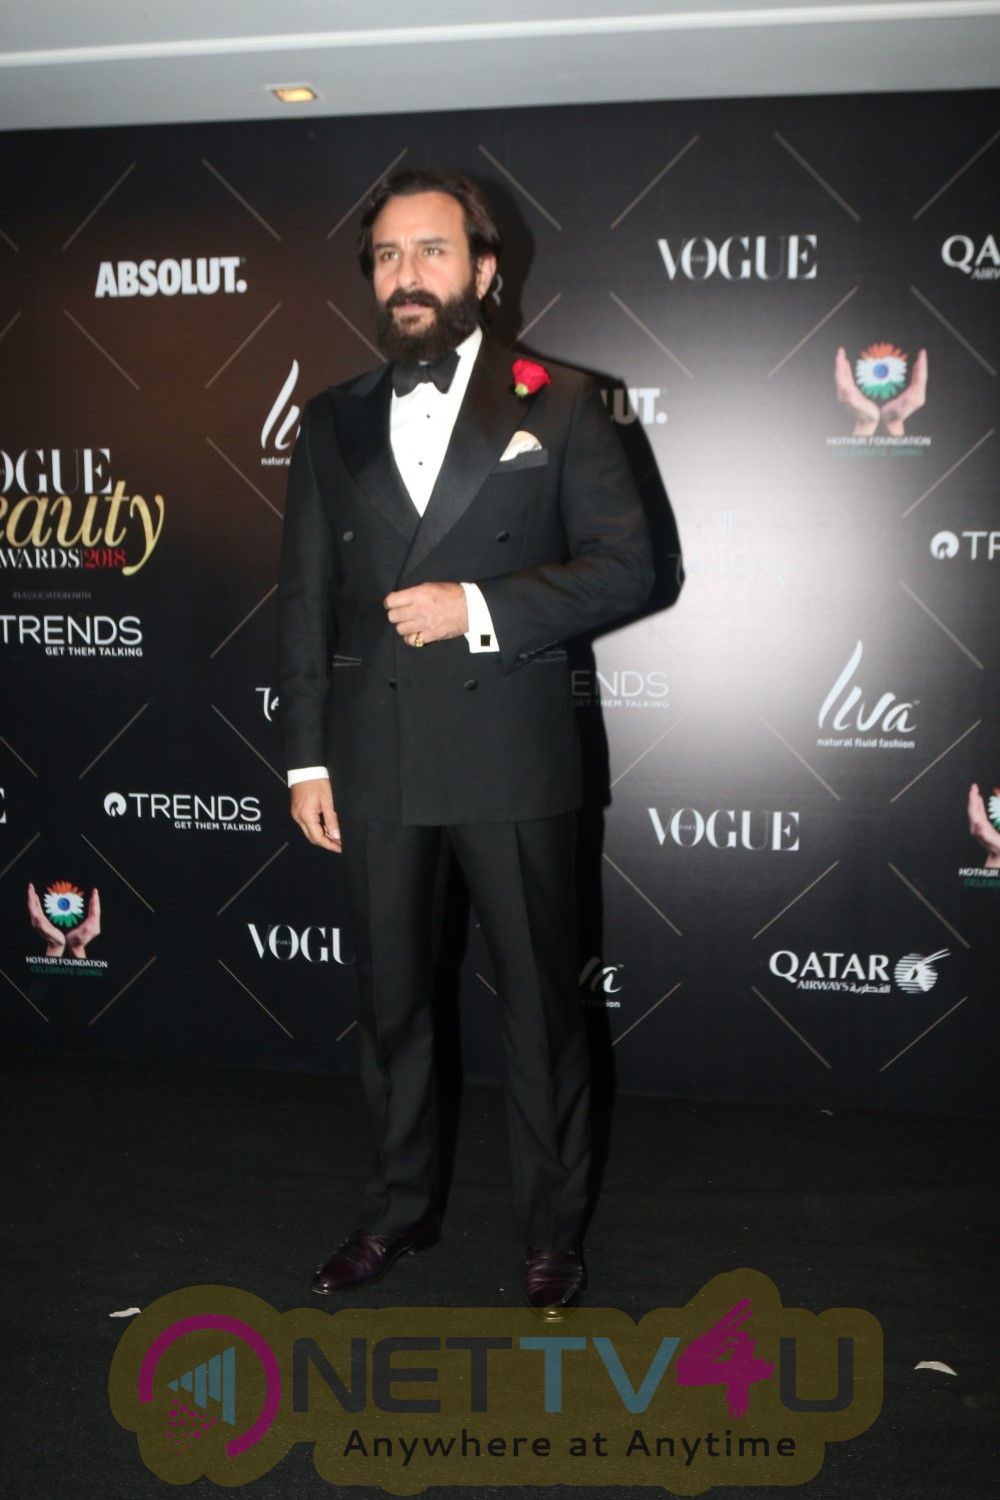 Vogue Beauty Awards In 2018  Hindi Gallery